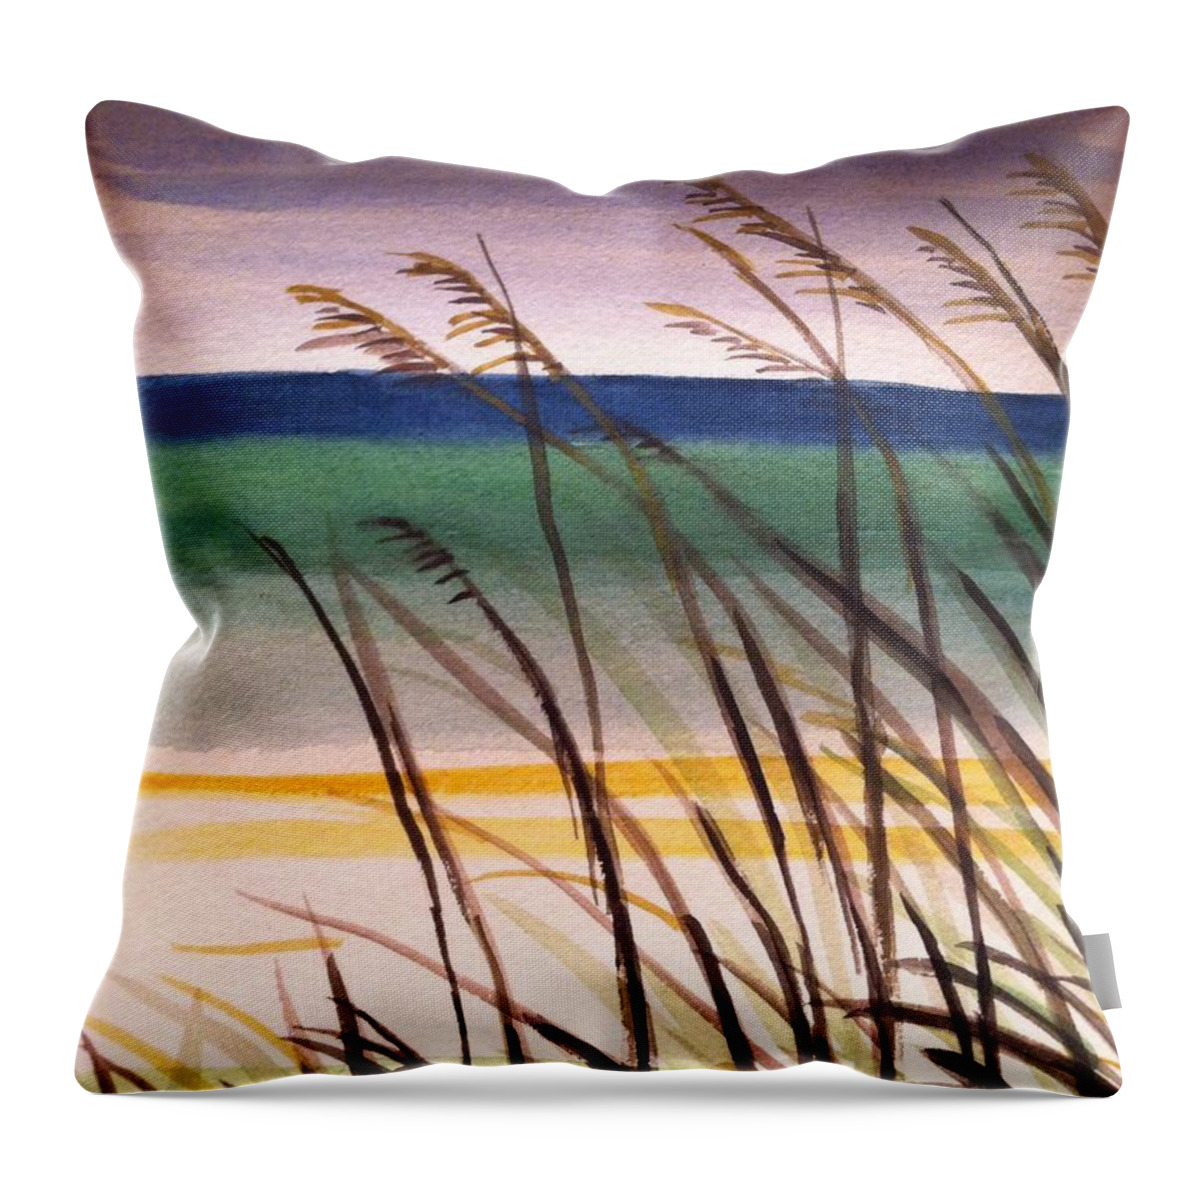  Throw Pillow featuring the painting A day at the beach 2 by Hae Kim